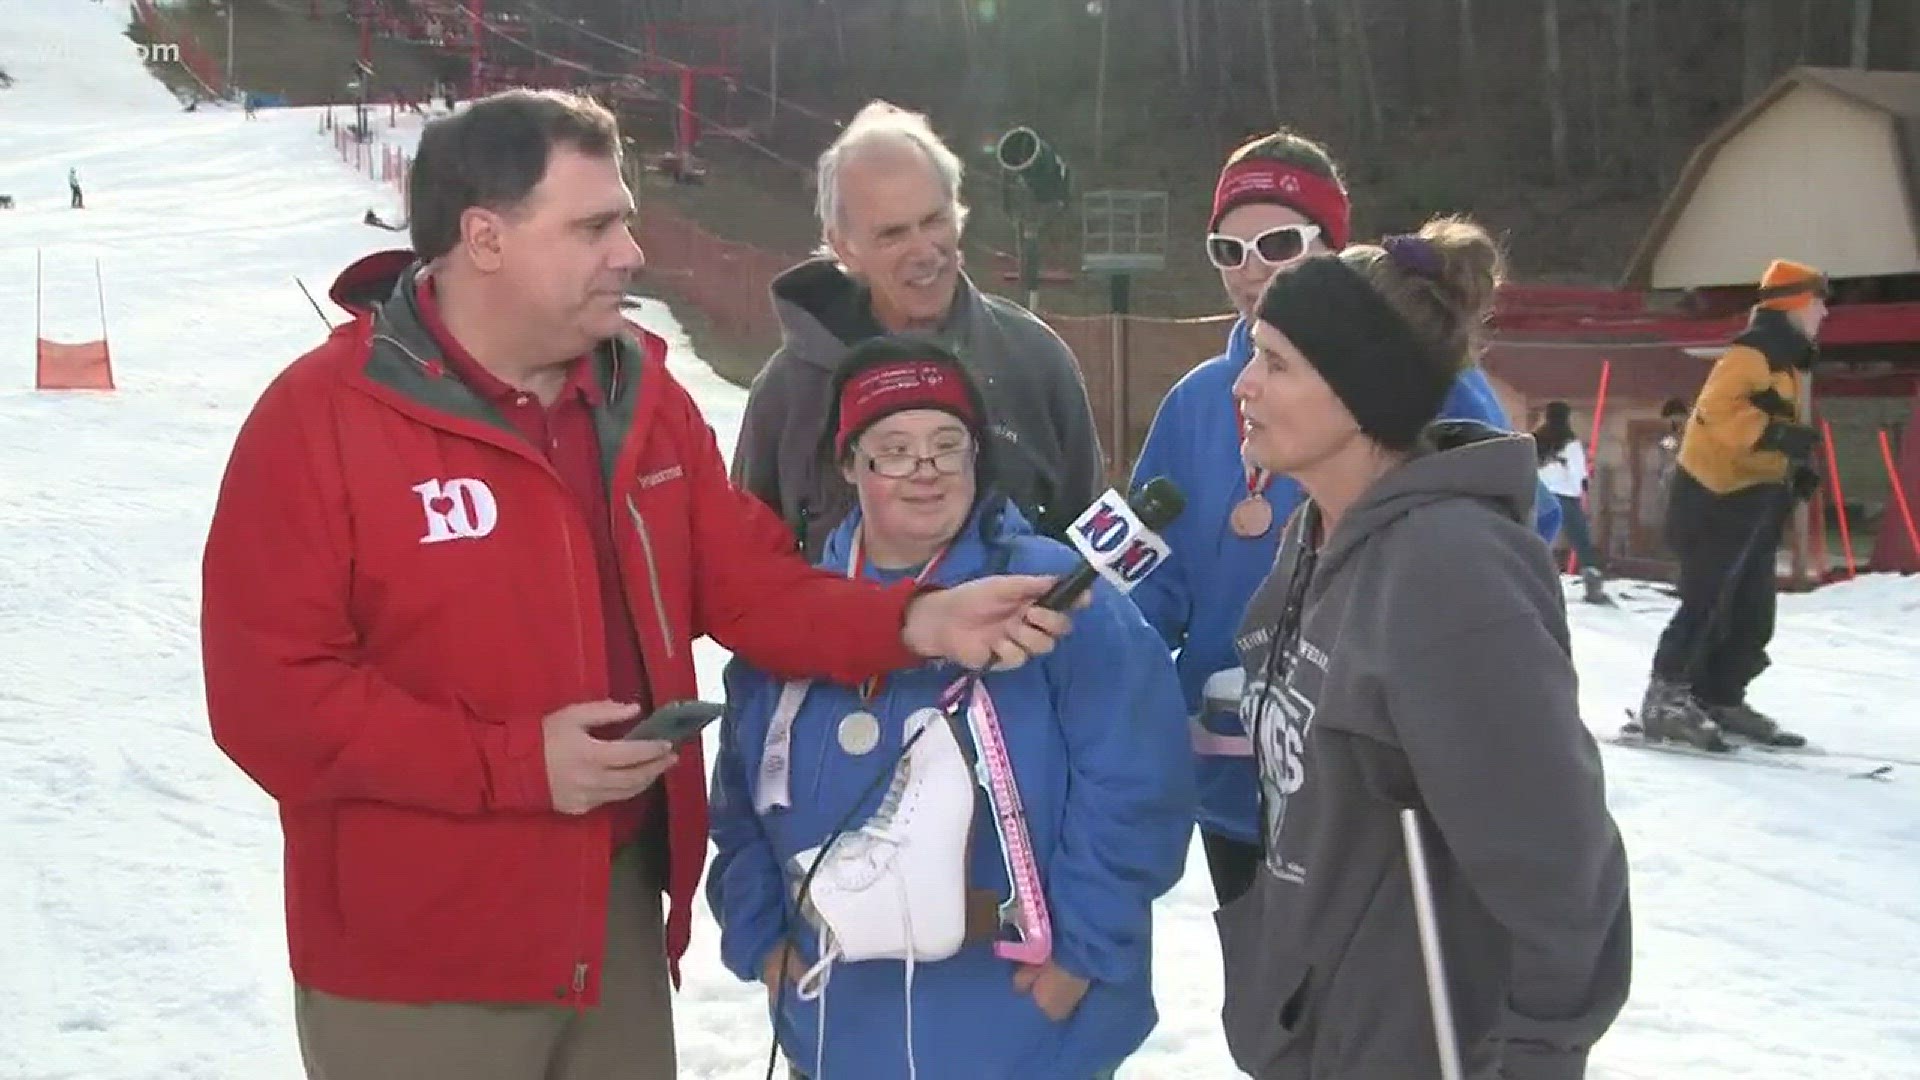 Athletes from Special Olympics Tennessee talk about competing during the winter games.Feb. 9, 2018-4pm